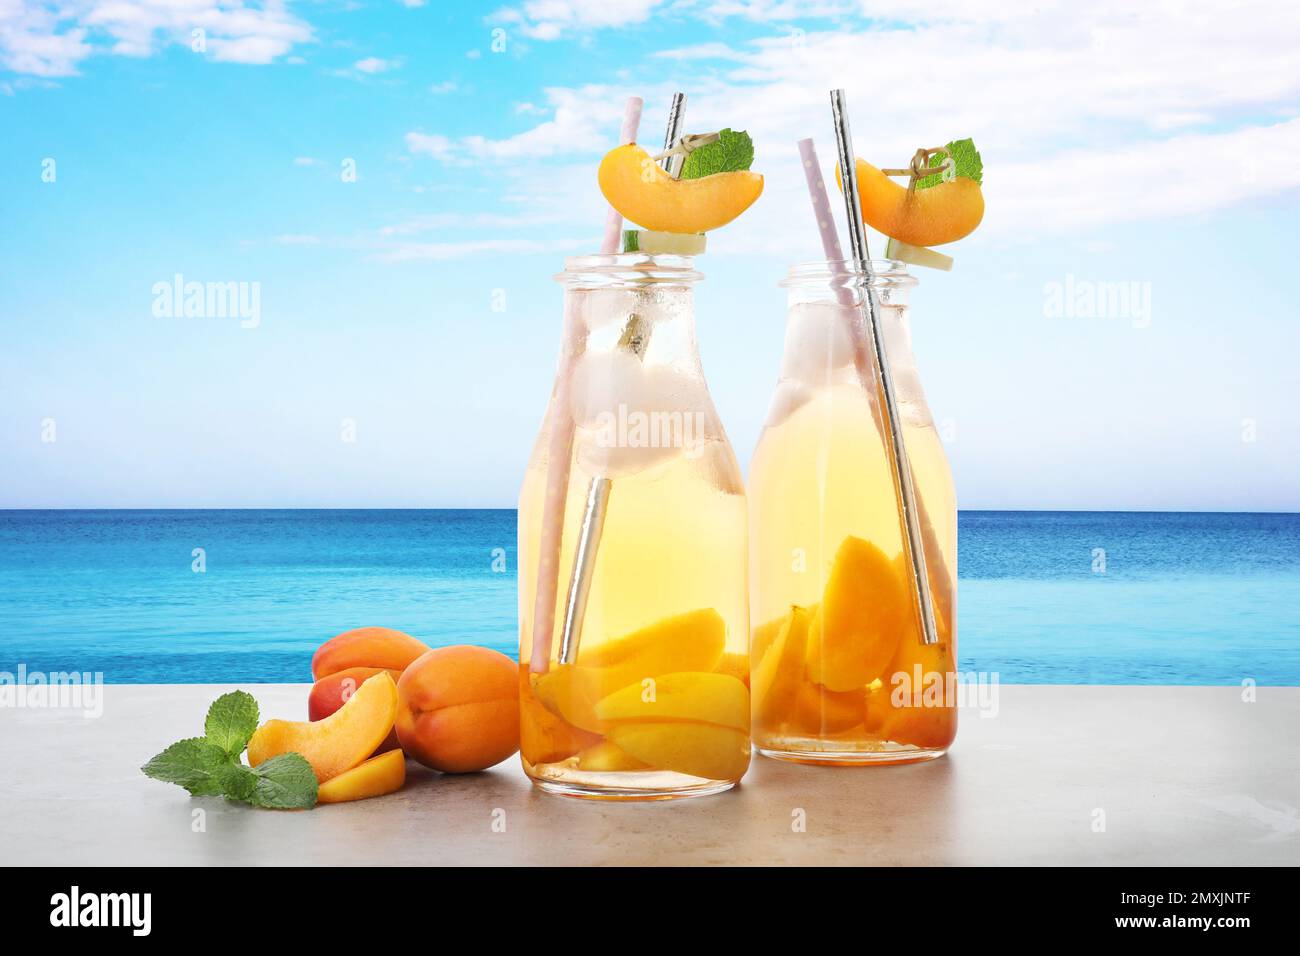 Tasty refreshing drink on table against sea Stock Photo